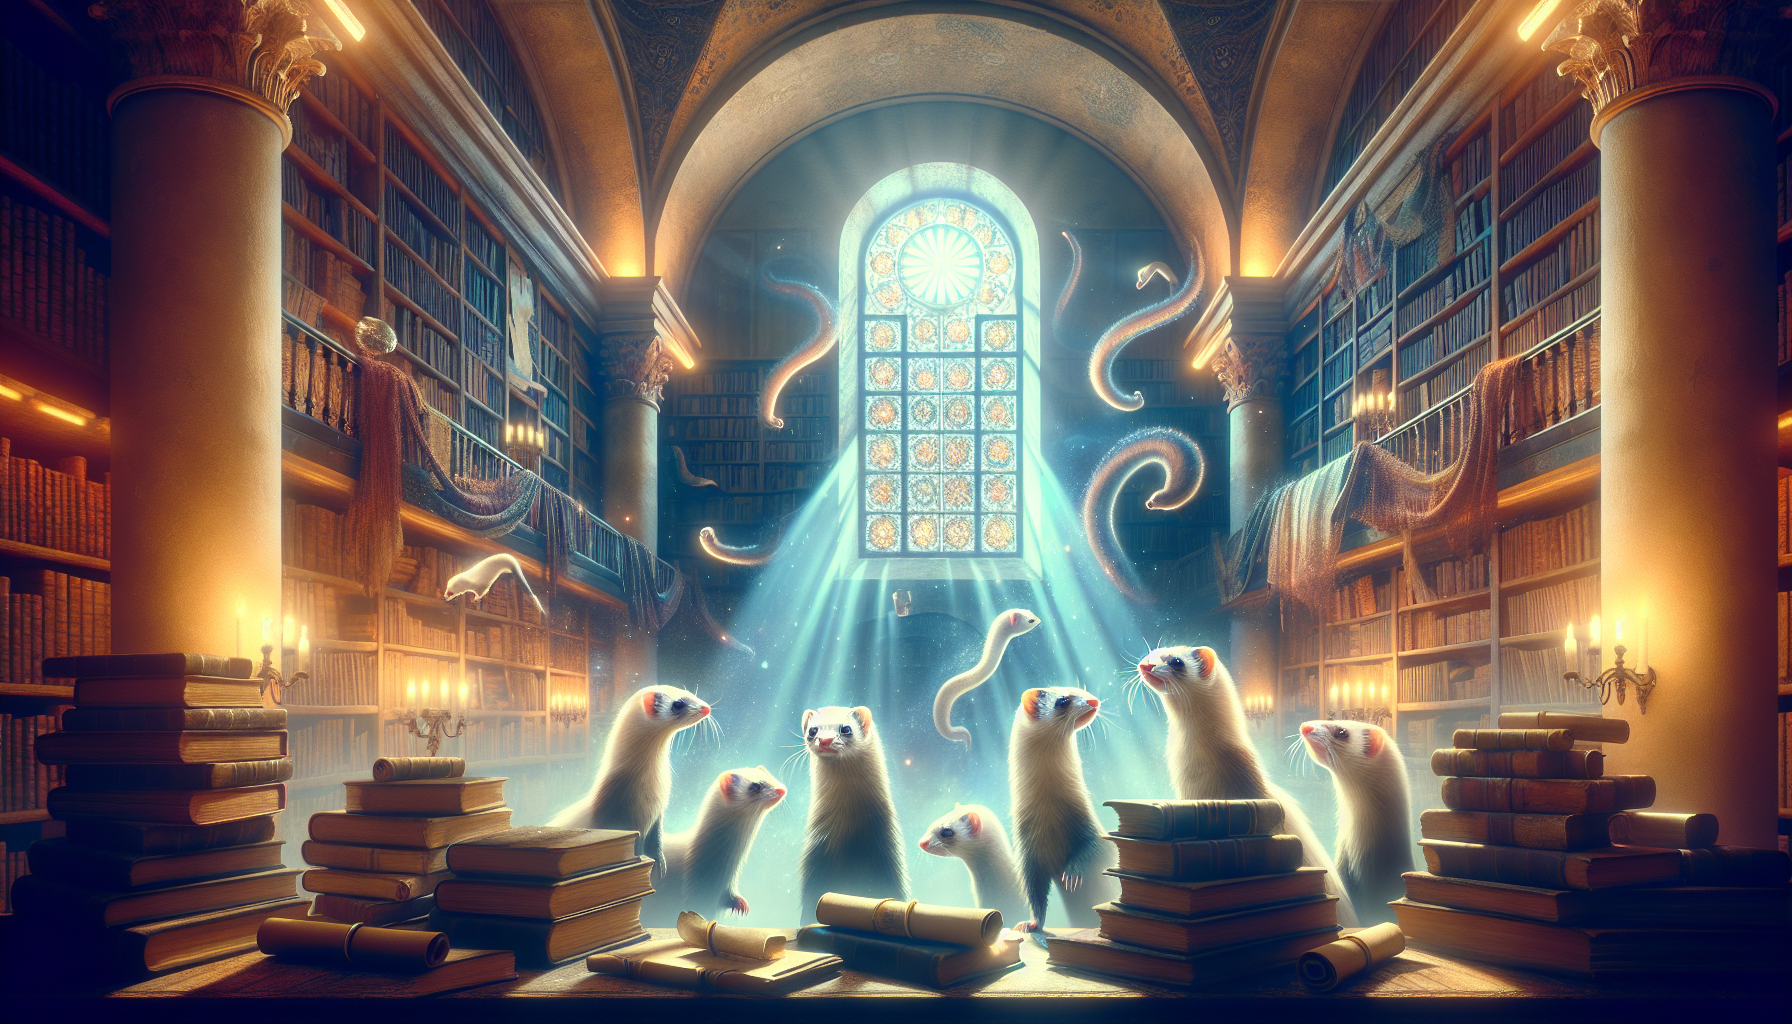 An imaginative illustration of multiple ferrets in various symbolic poses inside an ancient library filled with books and scrolls, under a large window casting mystical light, emphasizing an air of my